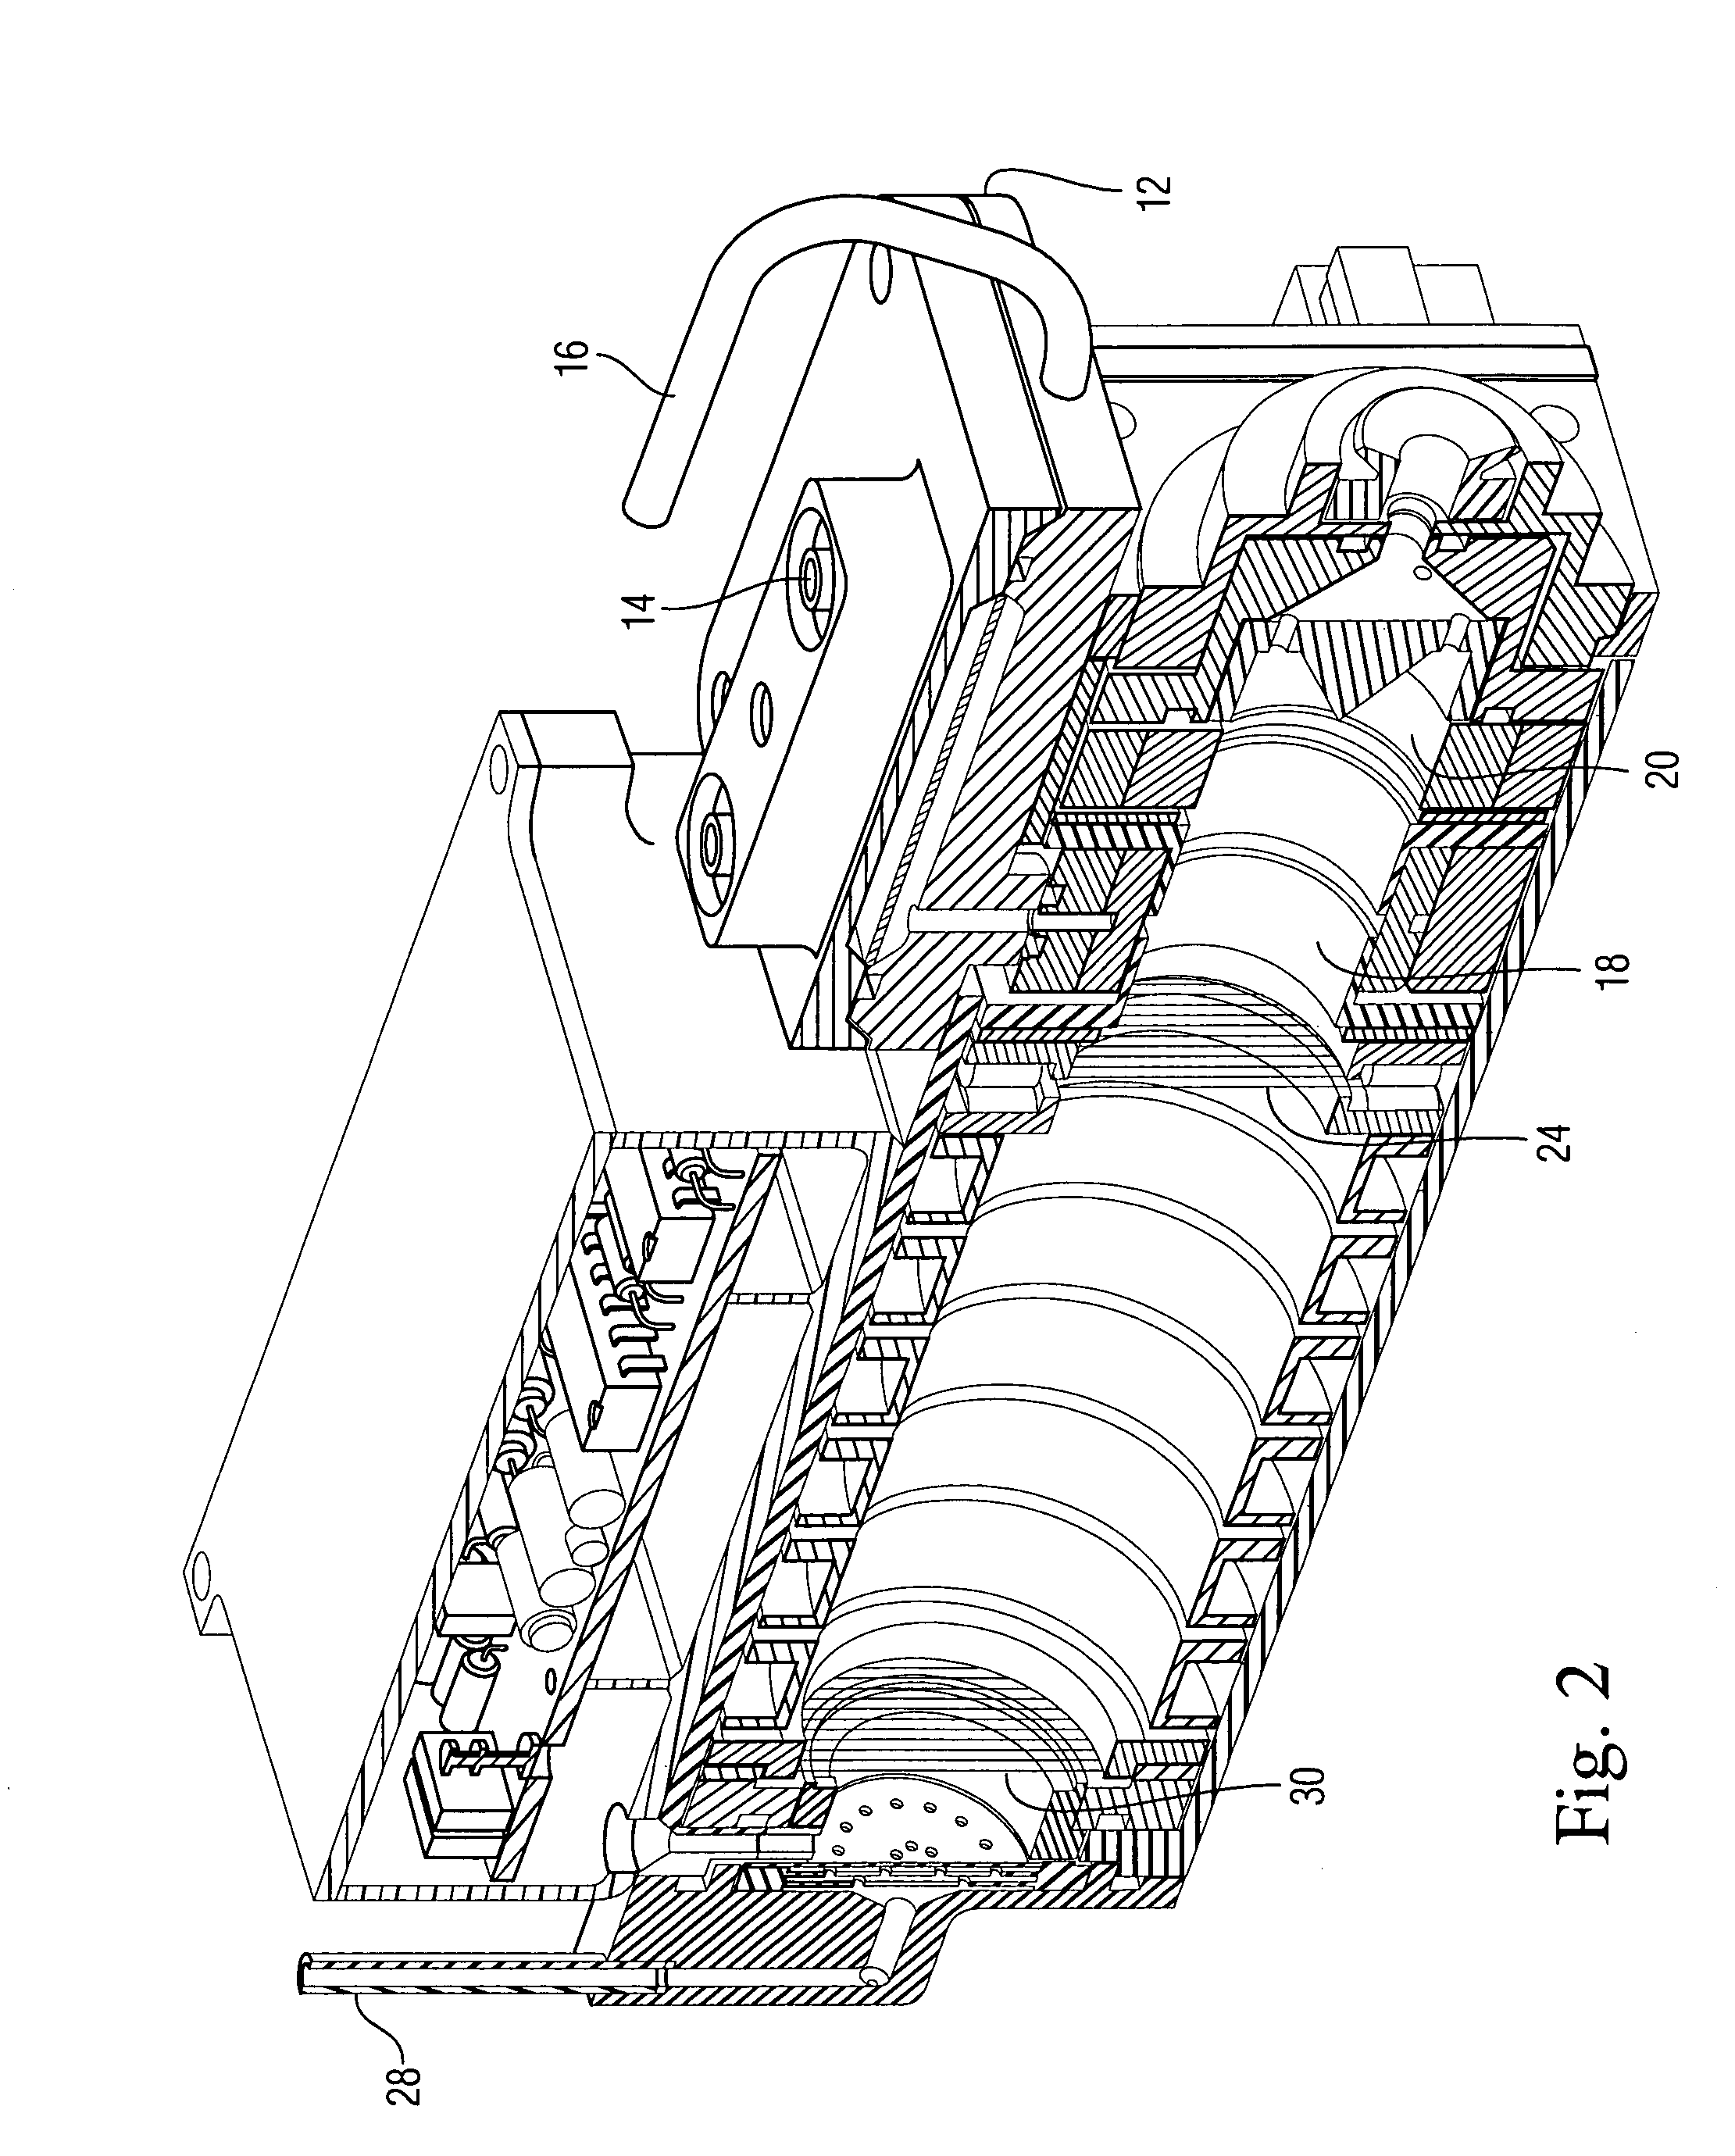 Apparatus and method for water vapor removal in an ion mobility spectrometer